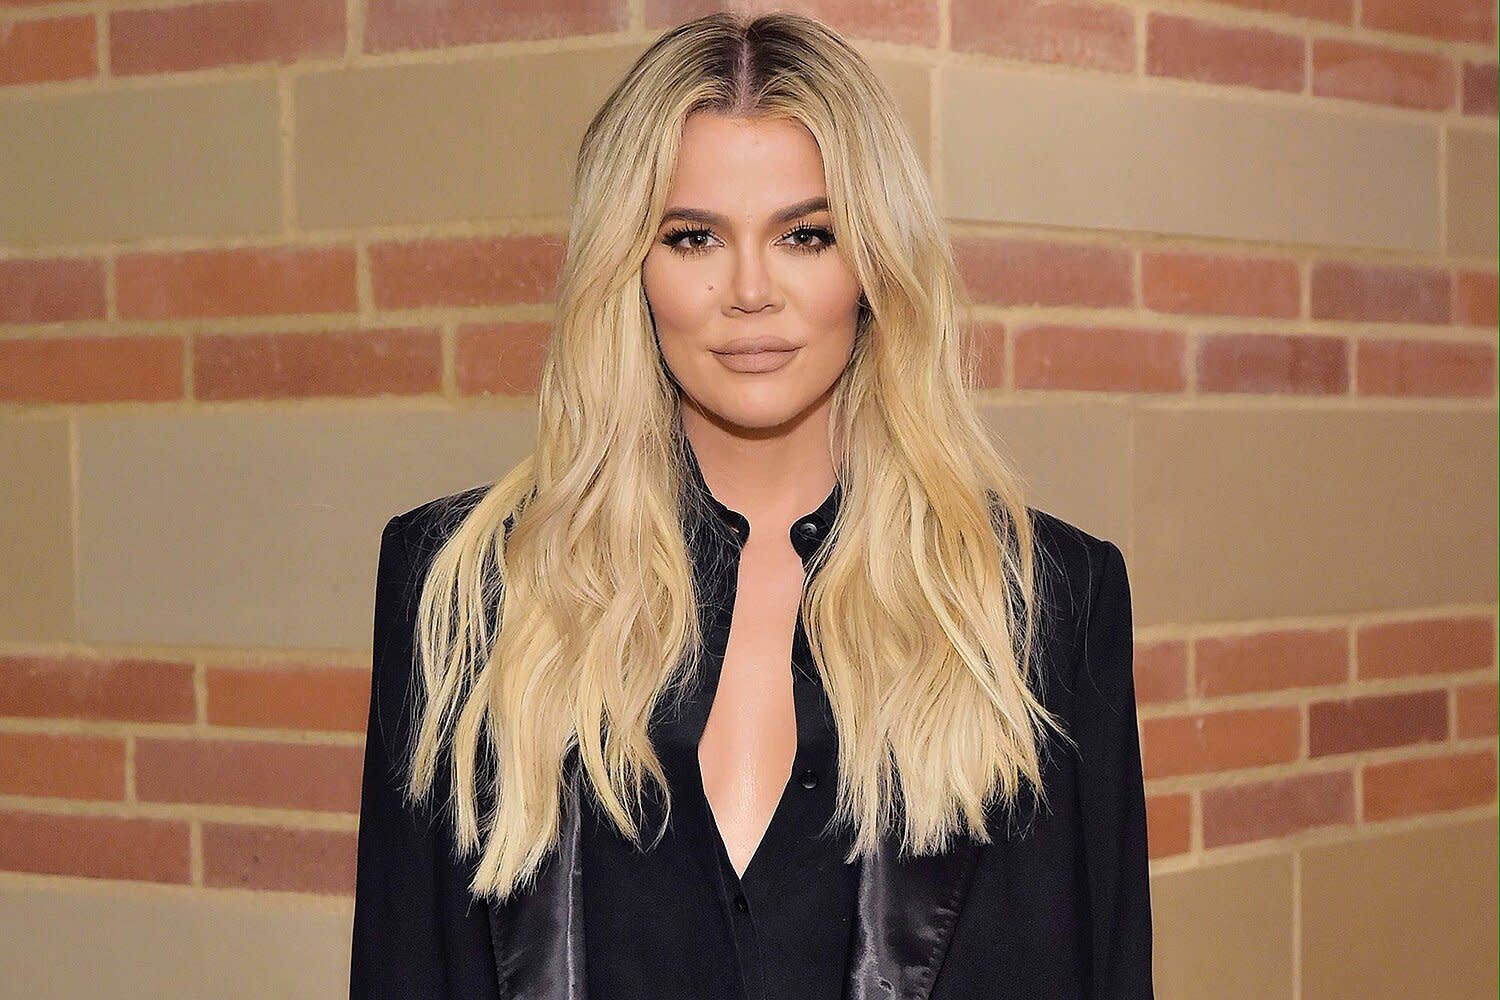 Khloé Kardashian considers surrogacy, reveals that she will have a high-risk pregnancy: ‘It’s scary’